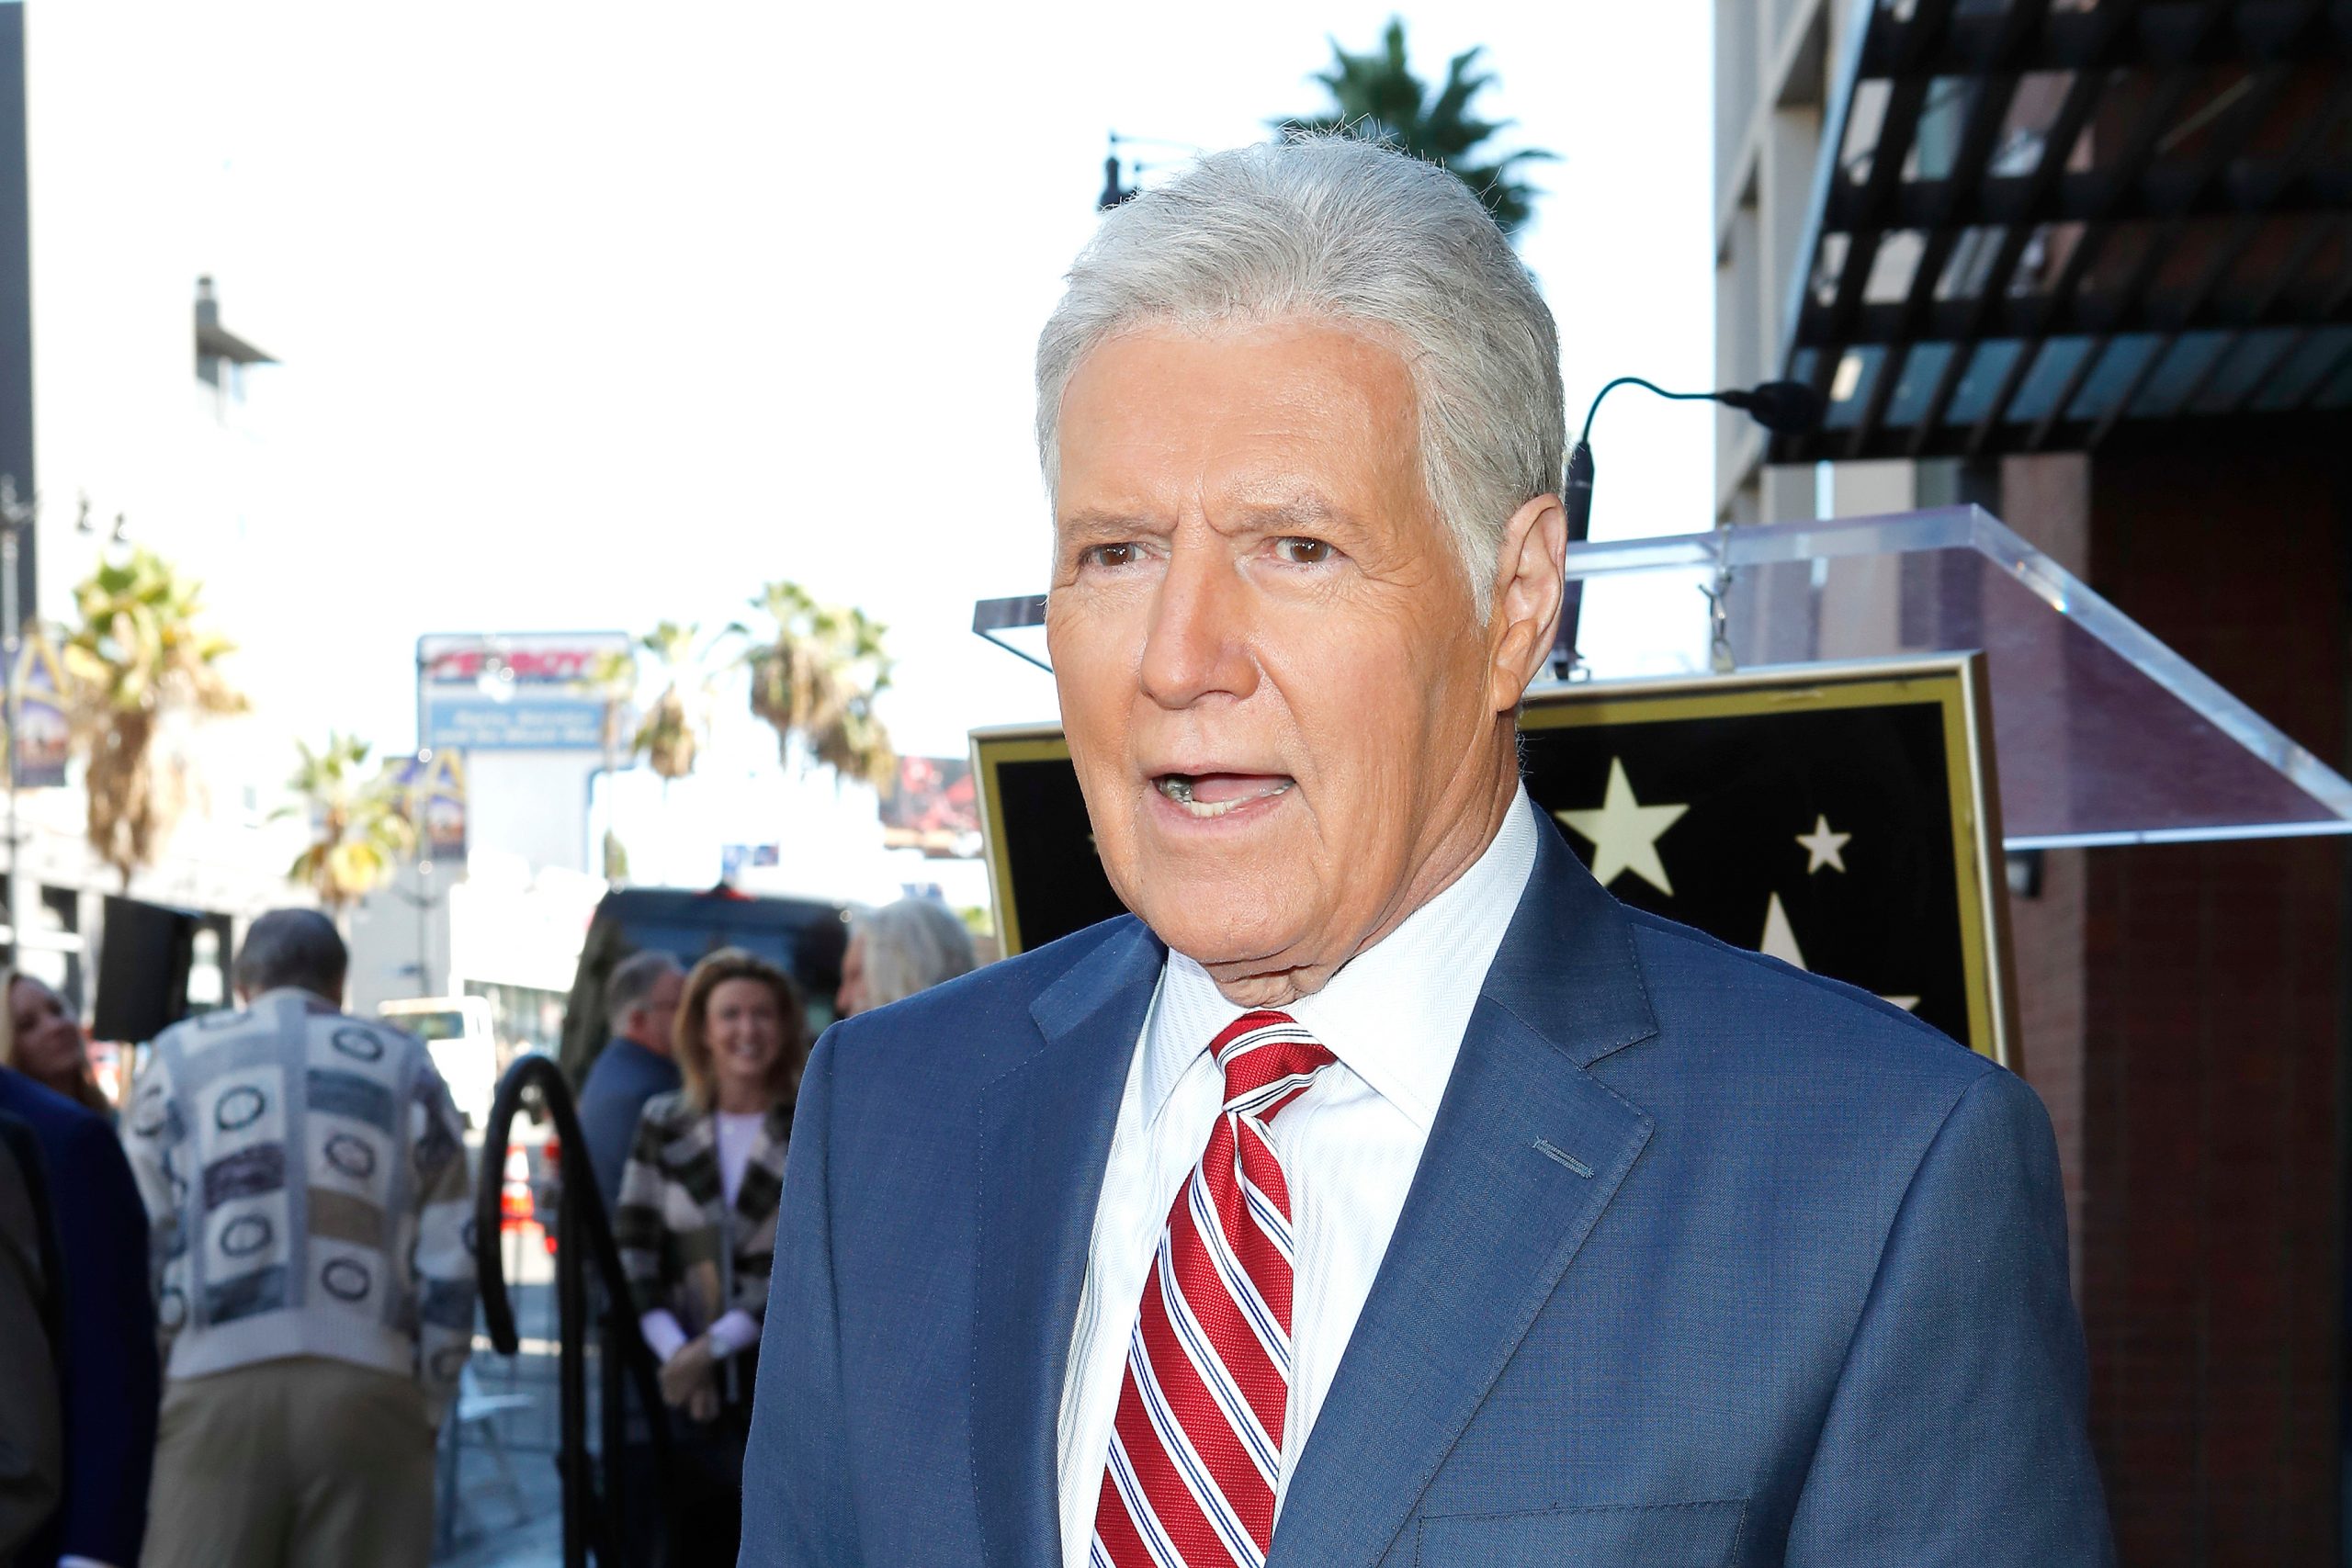 Late ‘Jeopardy!’ Host Alex Trebek’s Wardrobe to Be Donated to Homeless Organization For Interviews